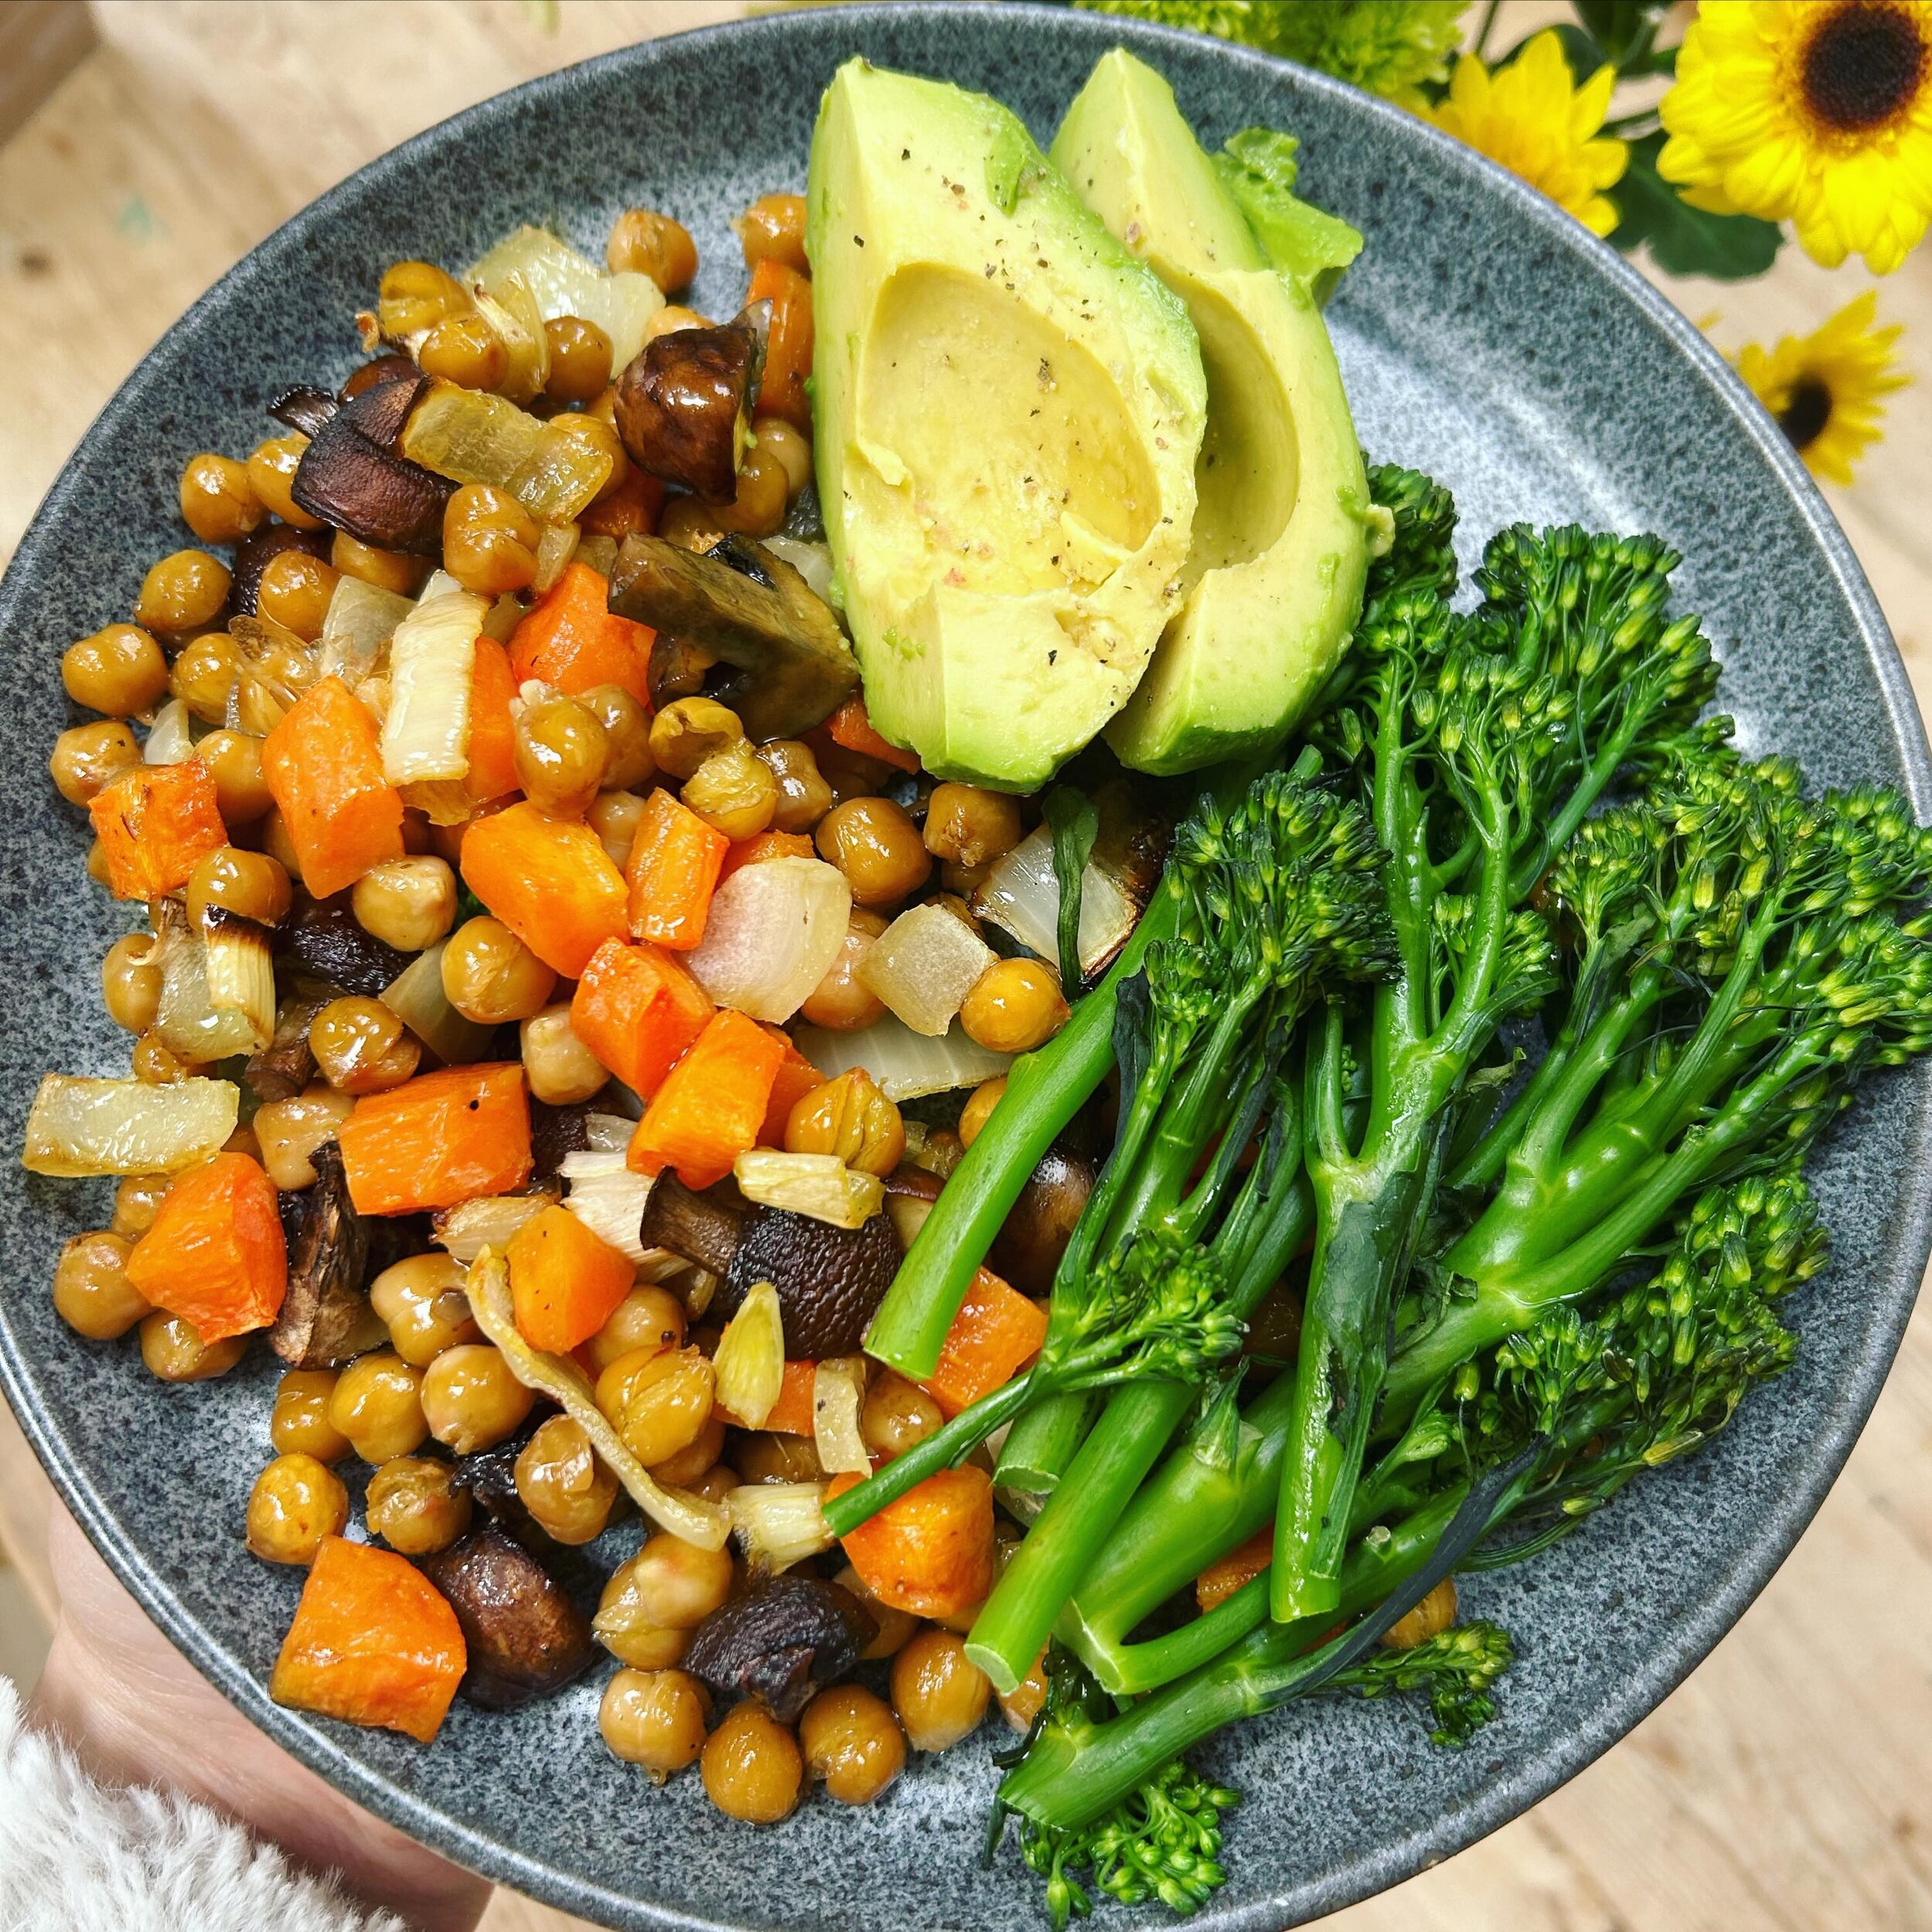 This is one of my favourite quick meals. Roasted chickpeas with any kind of spare veg added on. On this occasion I roasted some diced carrot and mushrooms. All you need to do is empty and rinse a tin of chickpeas, then roast them in the oven with a l